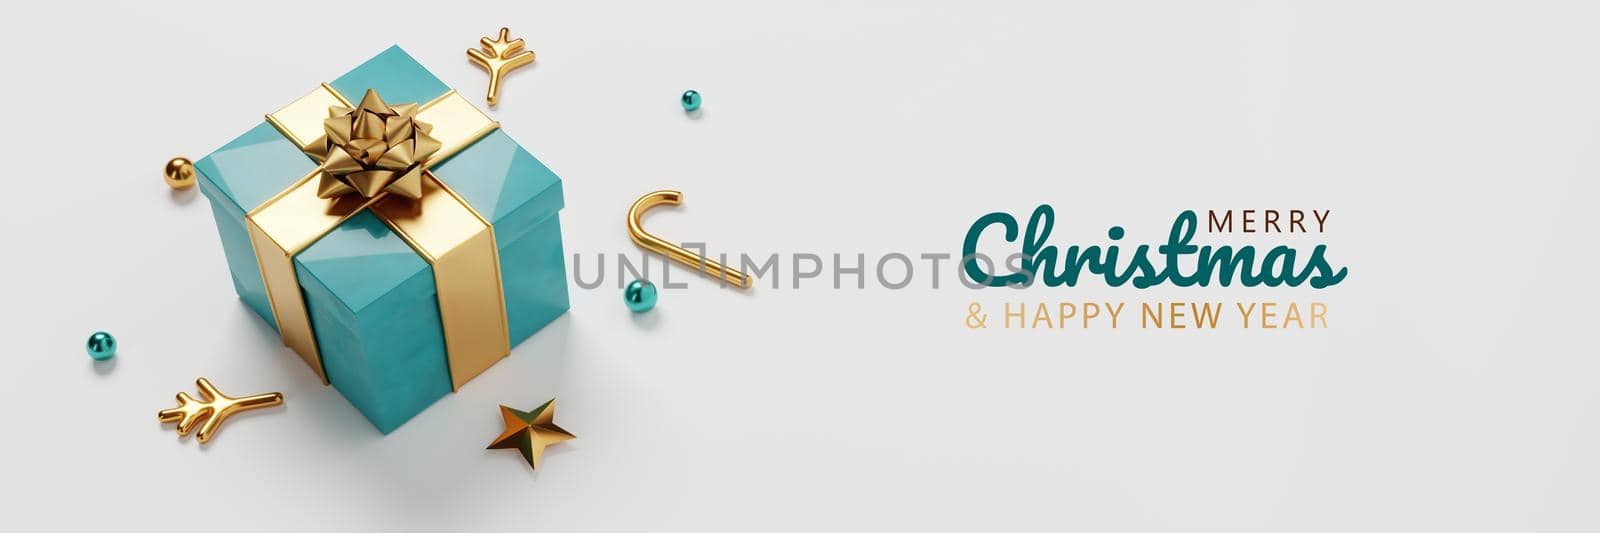 Merry Christmas and Happy New Year decoration props and ornament on white background. Holiday festival and winter concept. 3D illustration rendering.